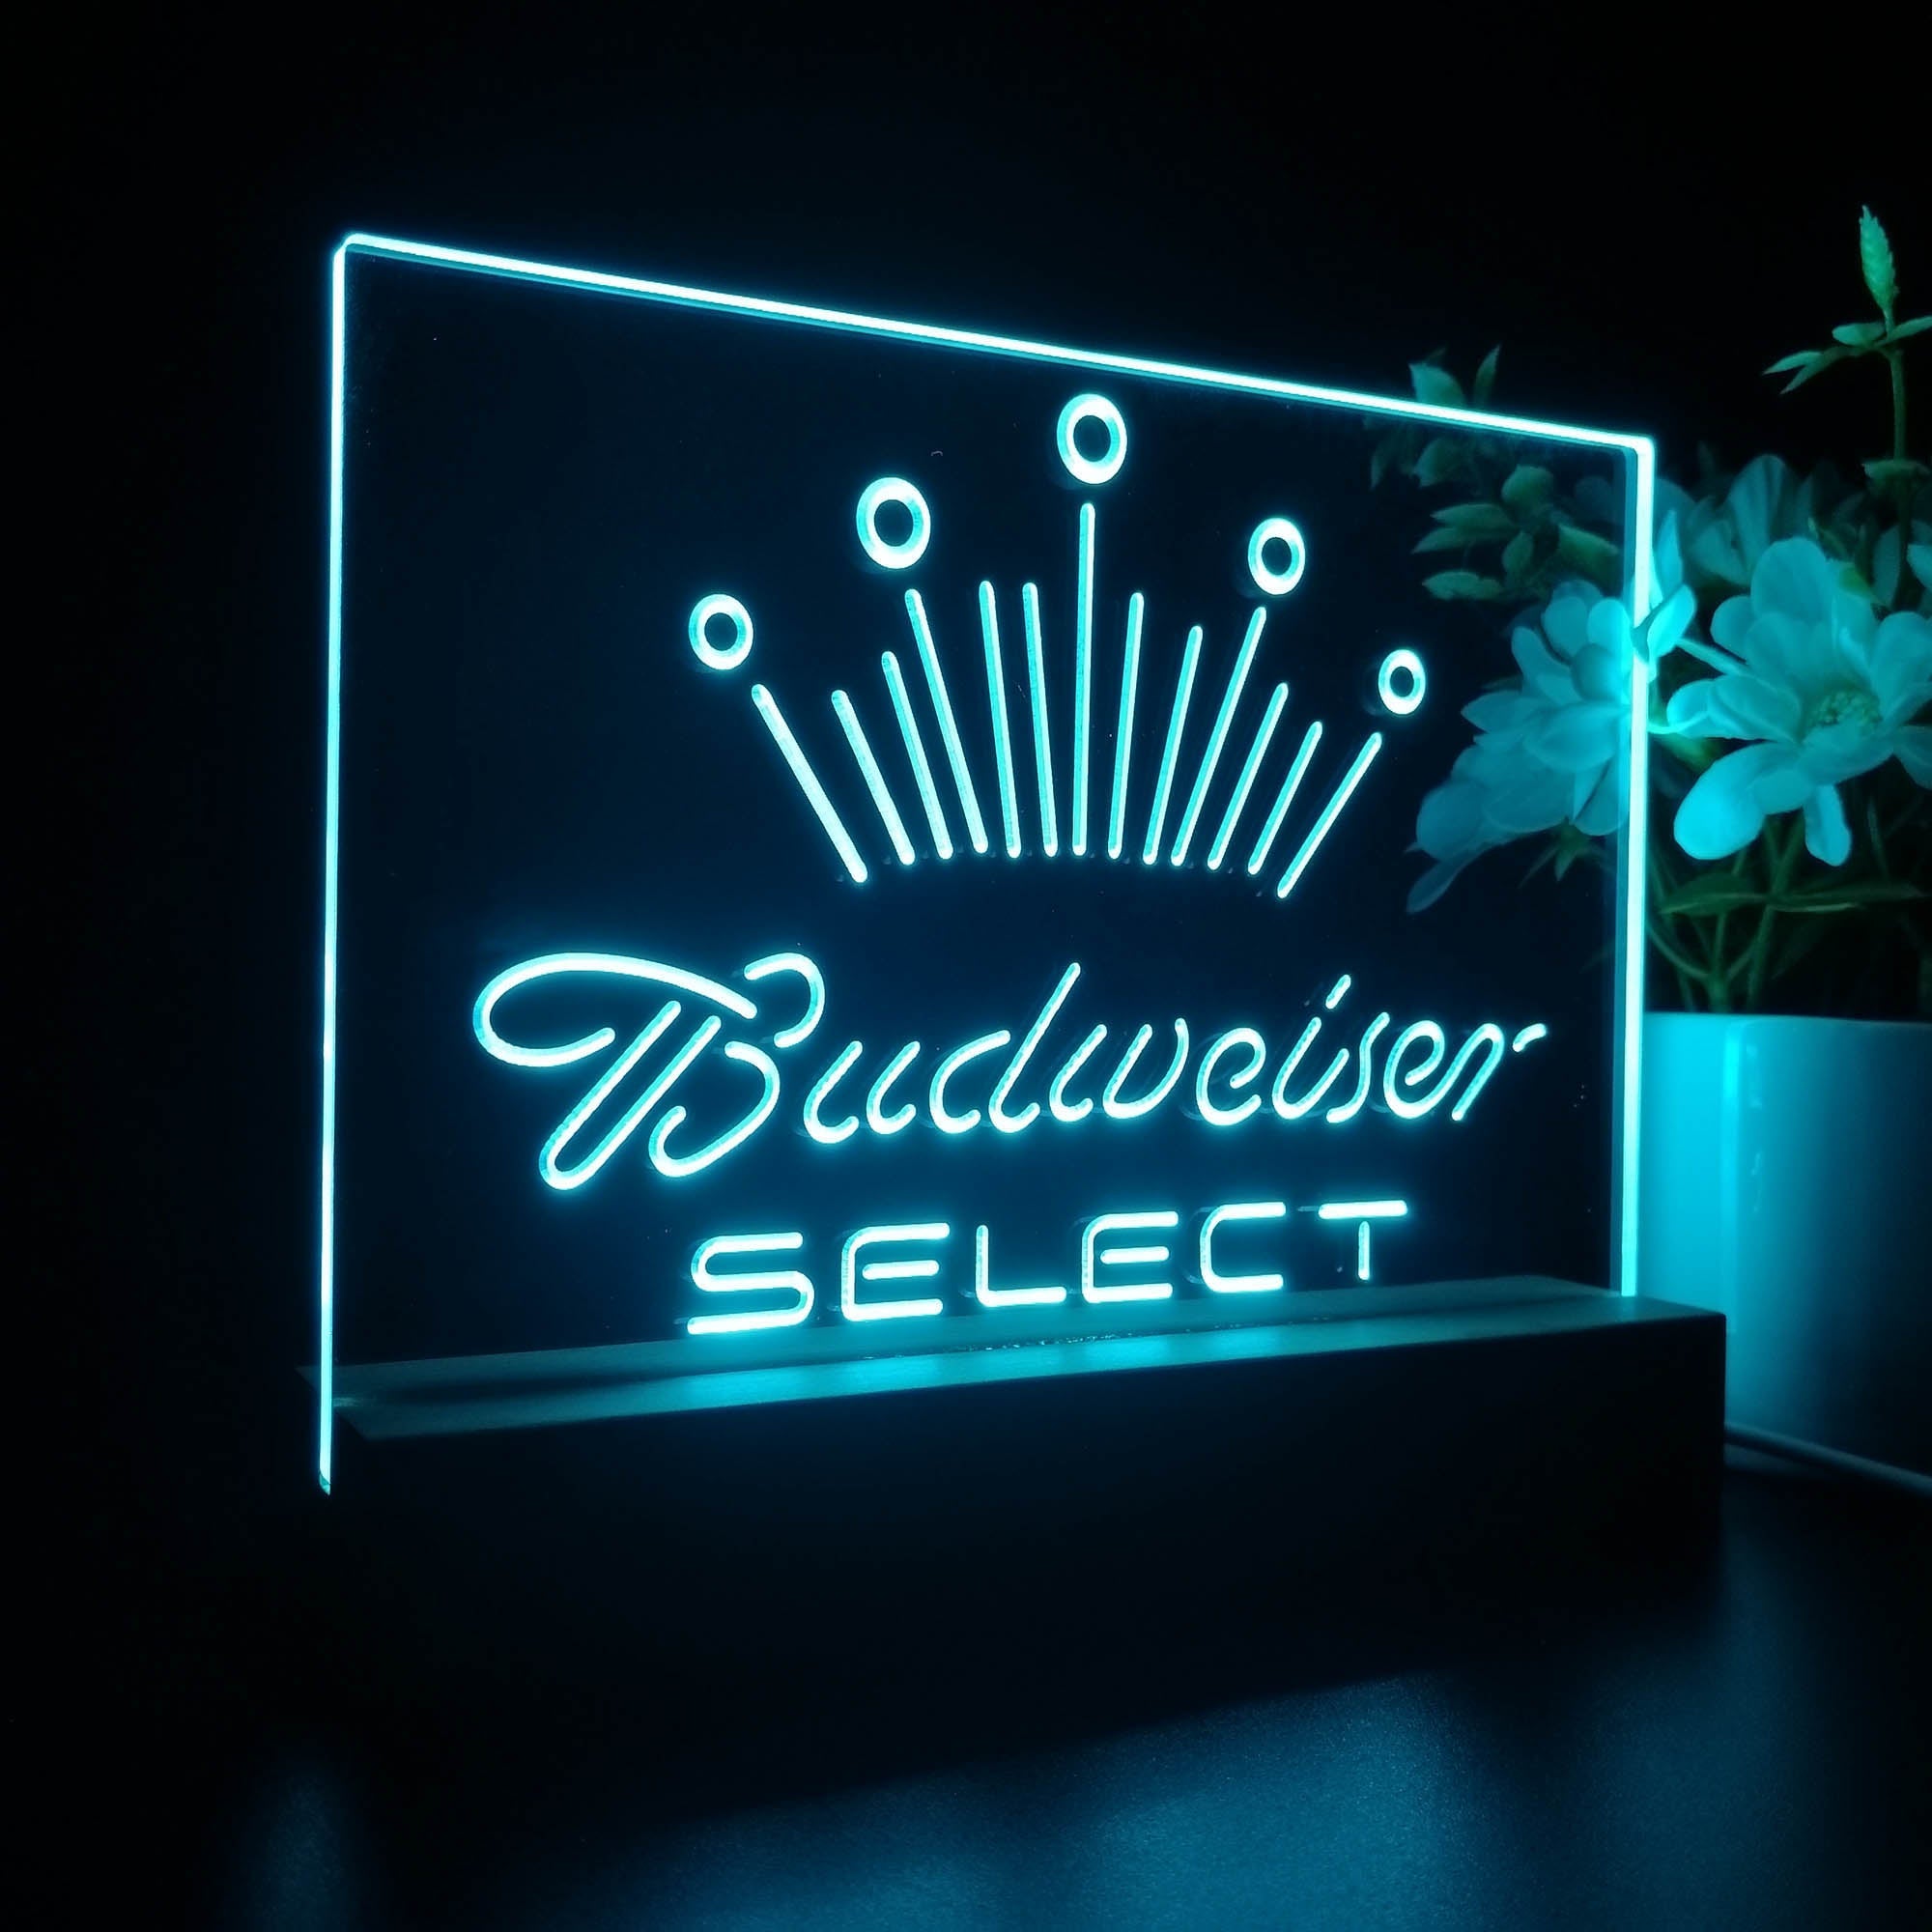 Budweisers Select Crown Classic Neon Sign Pub Bar Lamp